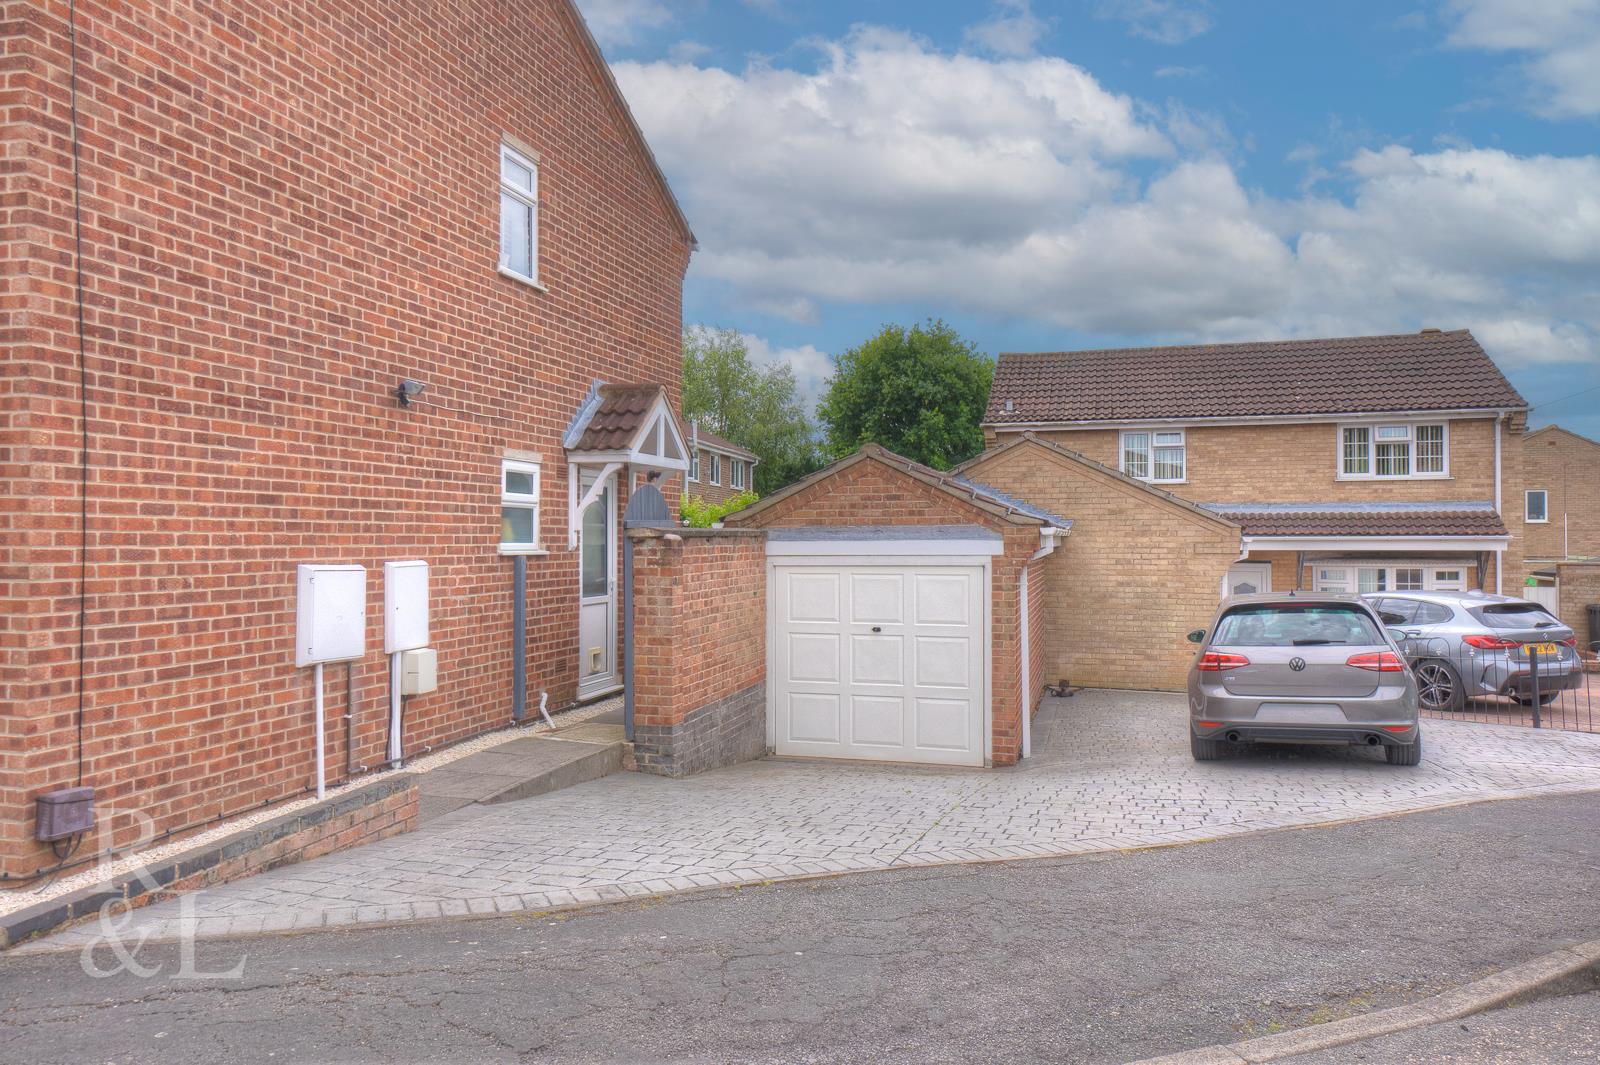 Property image for St. Johns Drive, Newhall, Swadlincote